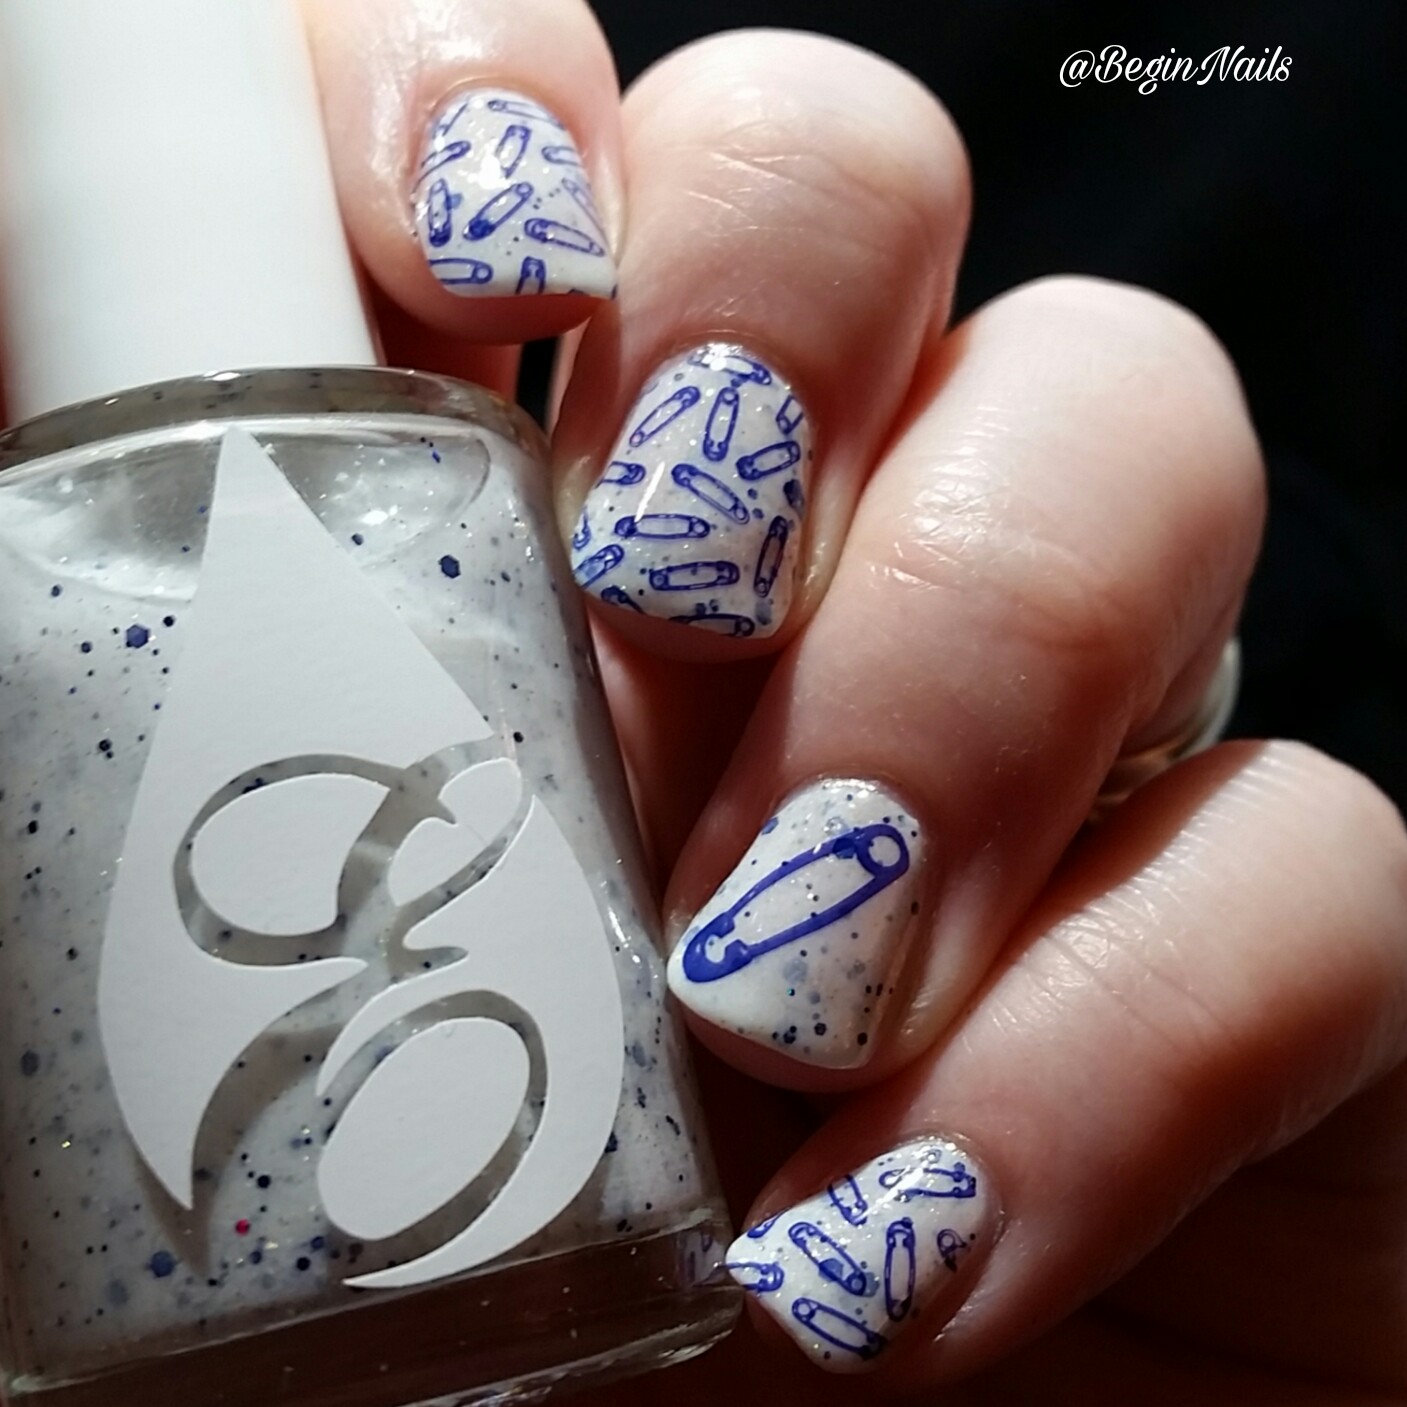 Let's Begin Nails: It Girl Nail Art IG118 Stamping Plate Review